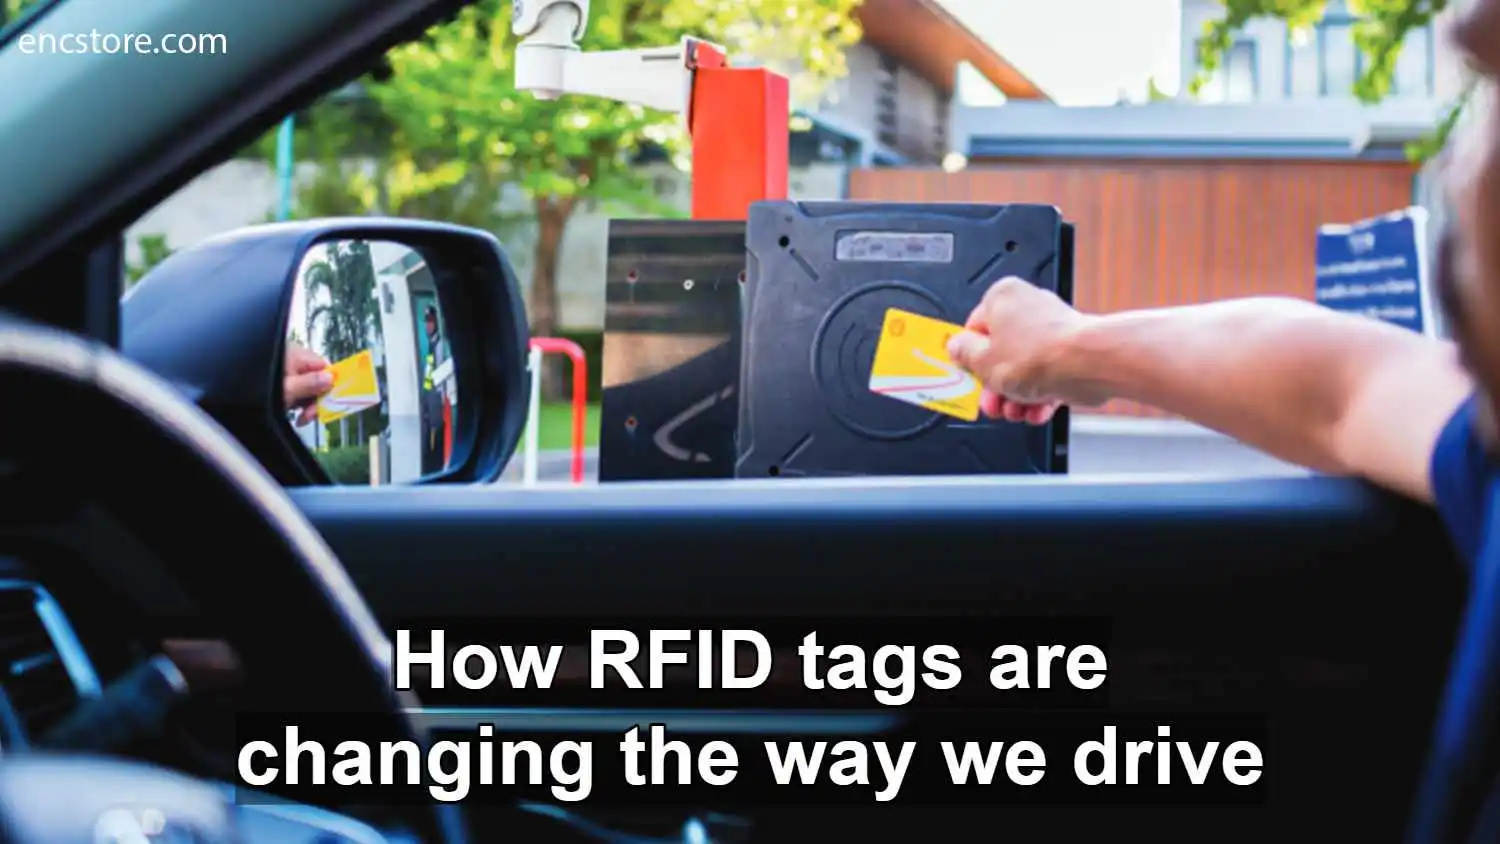 How RFID tags are changing the way we drive